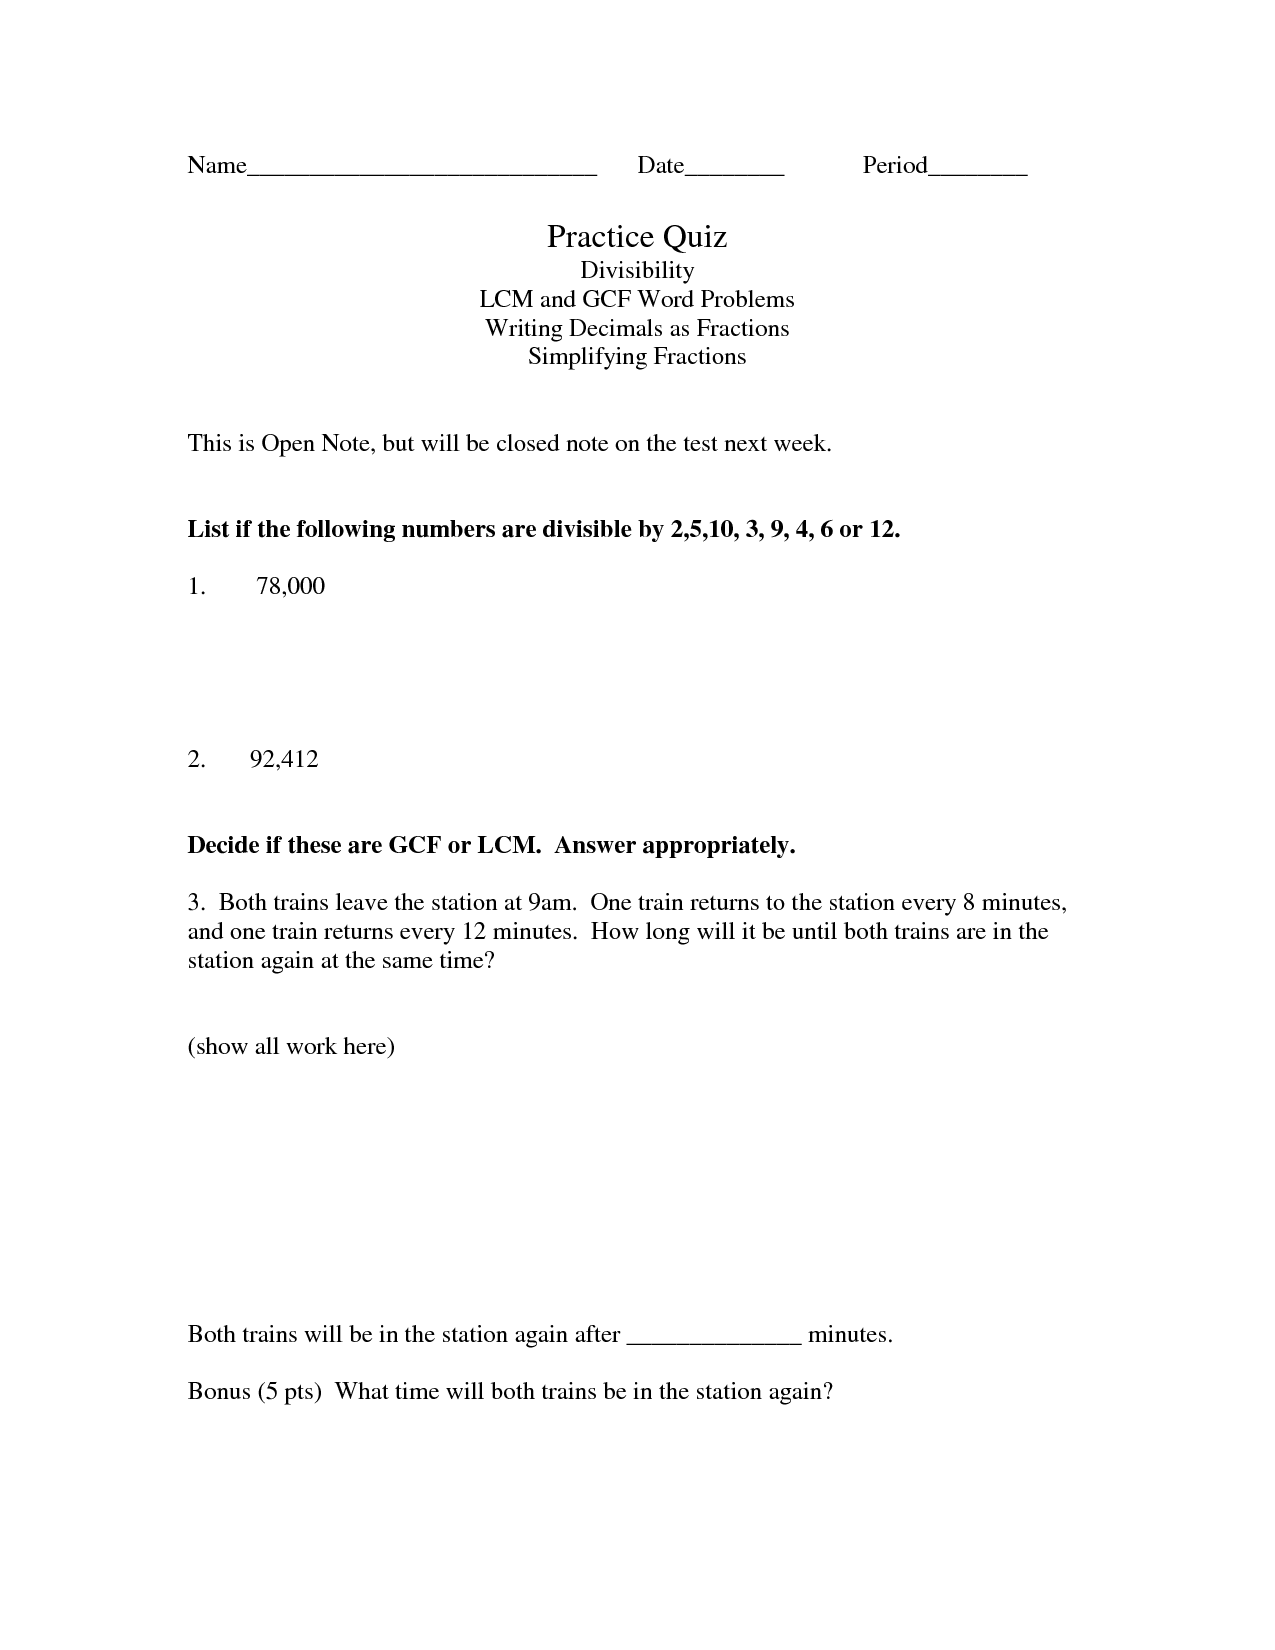 GCF and LCM Word Problems Worksheets Image